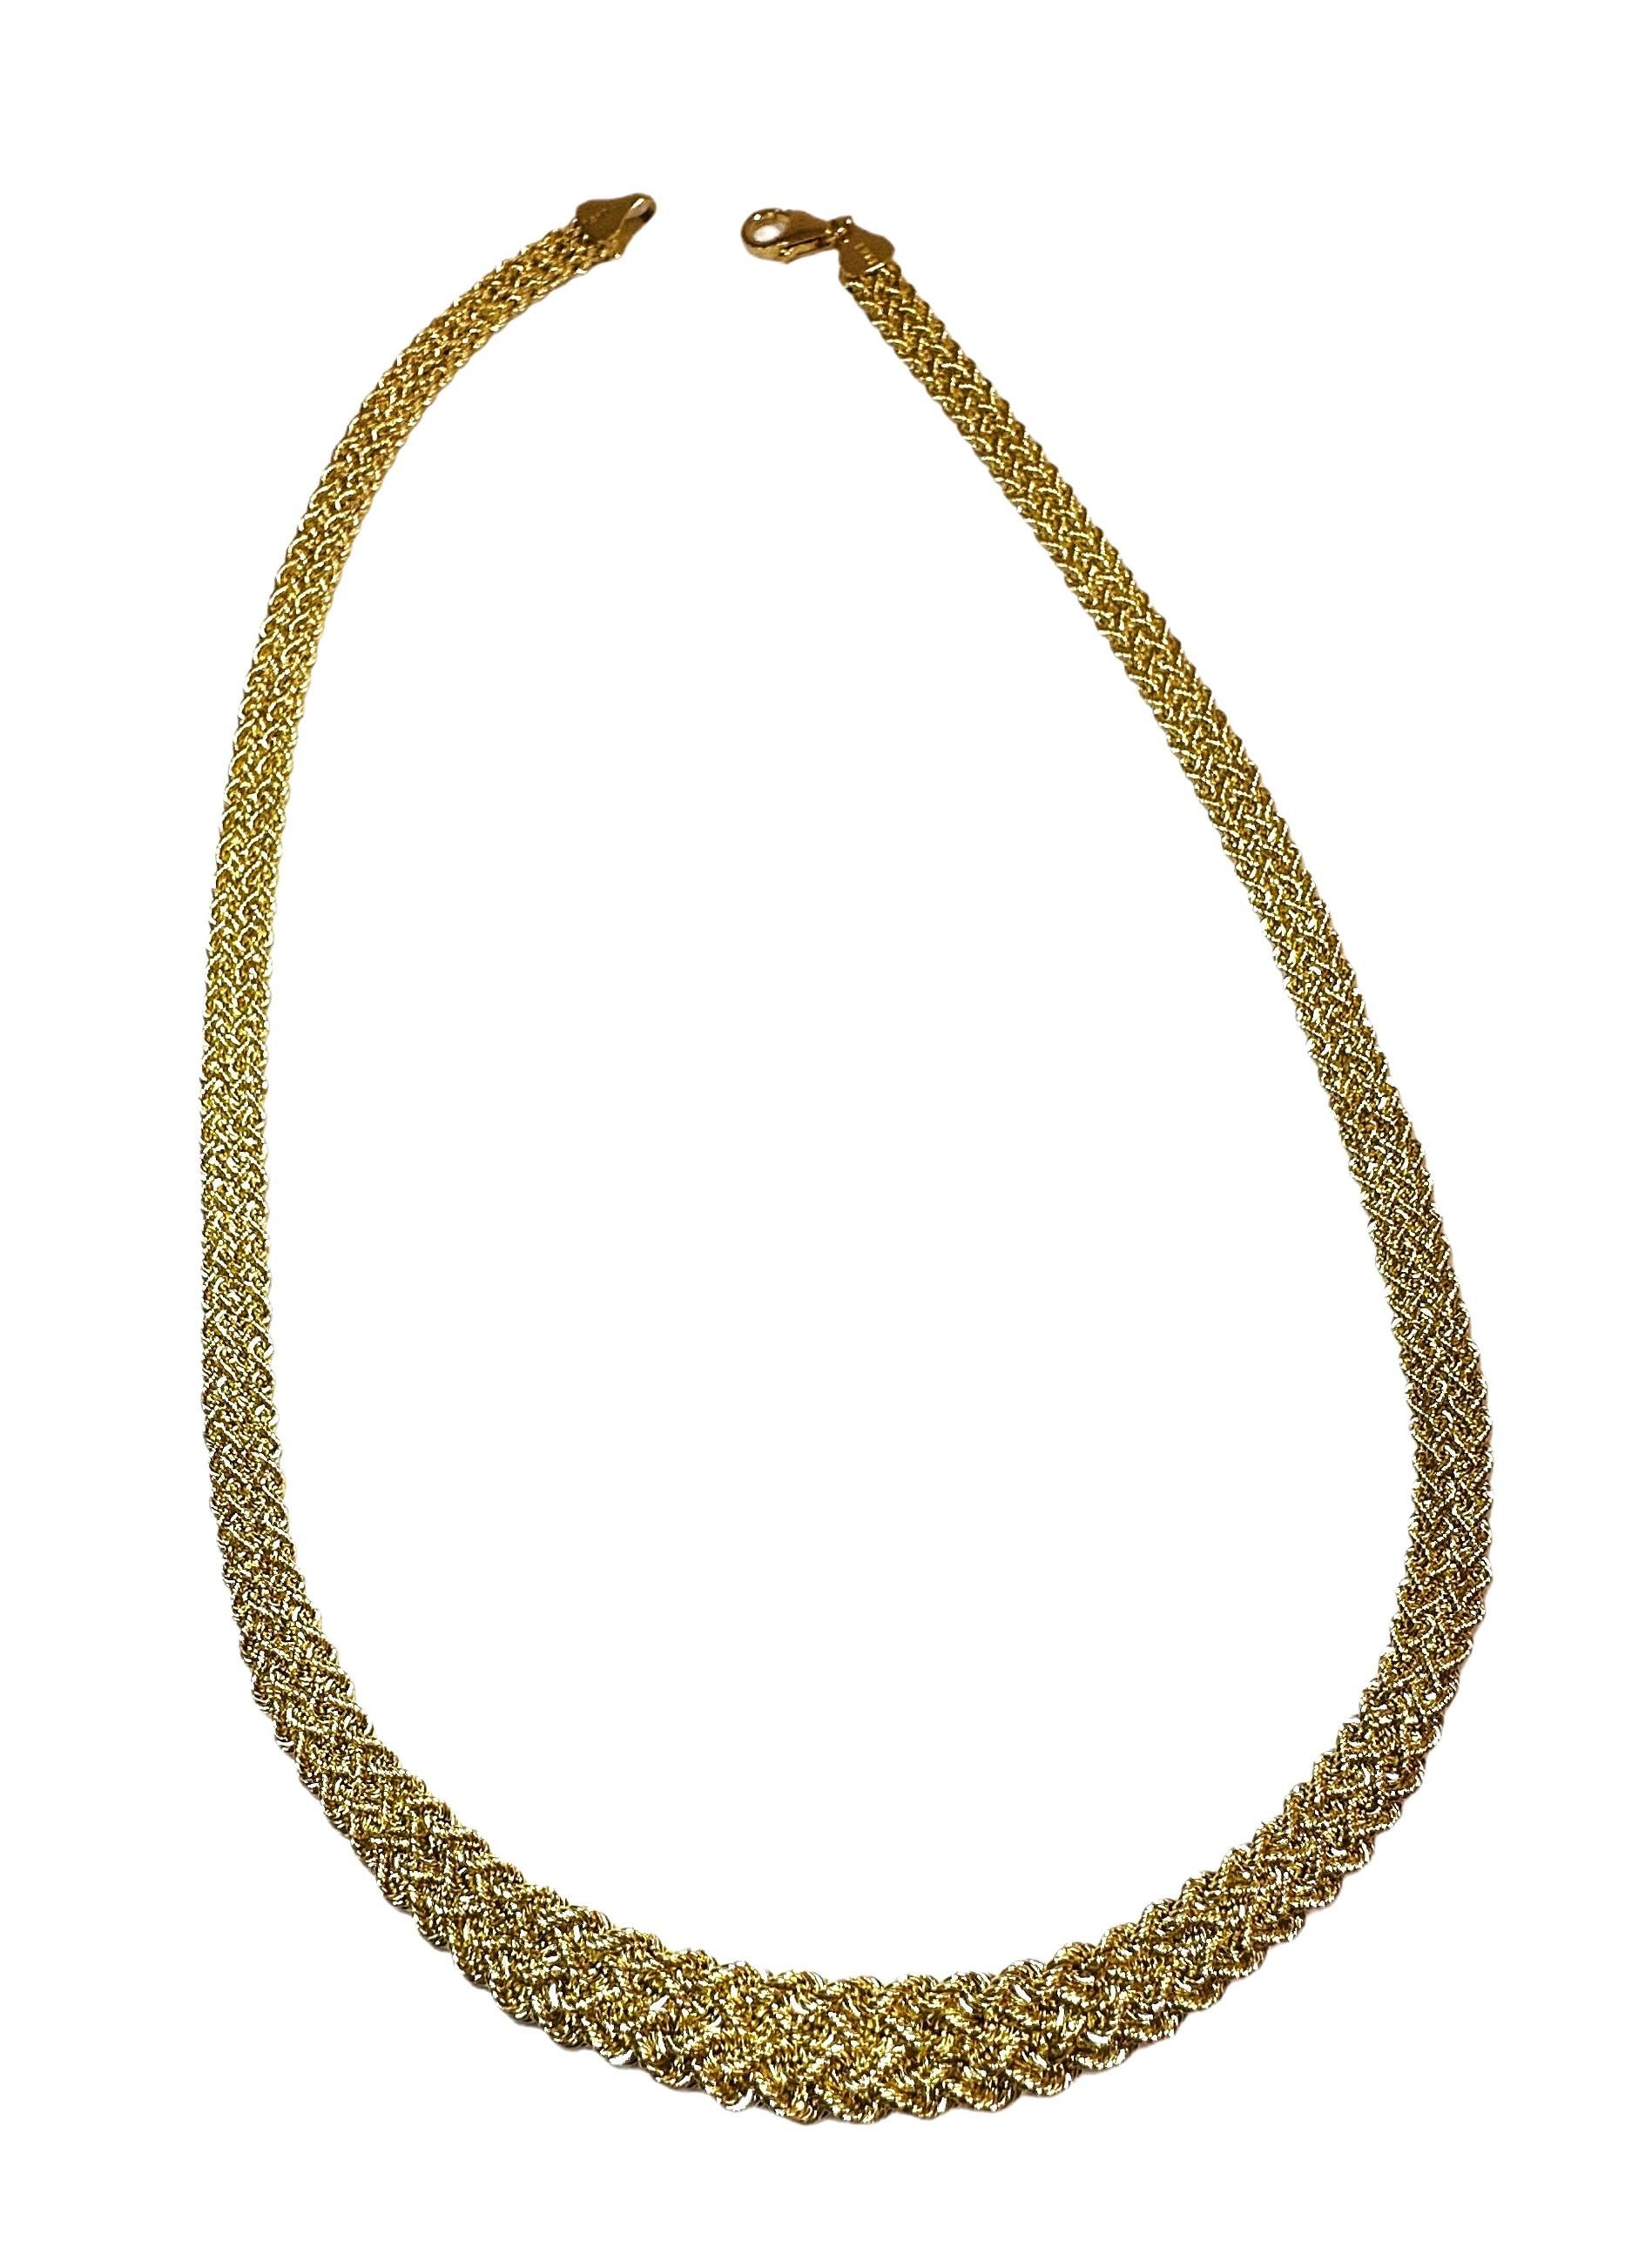 14k Yellow Gold Graduated Wove Aurafin Italian Necklace 16 Inches For Sale 3